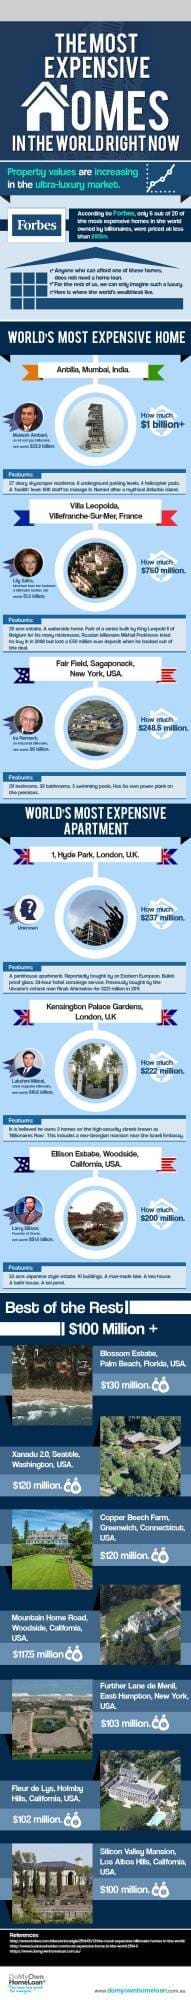 The Most Expensive Homes in the World-An Infographic